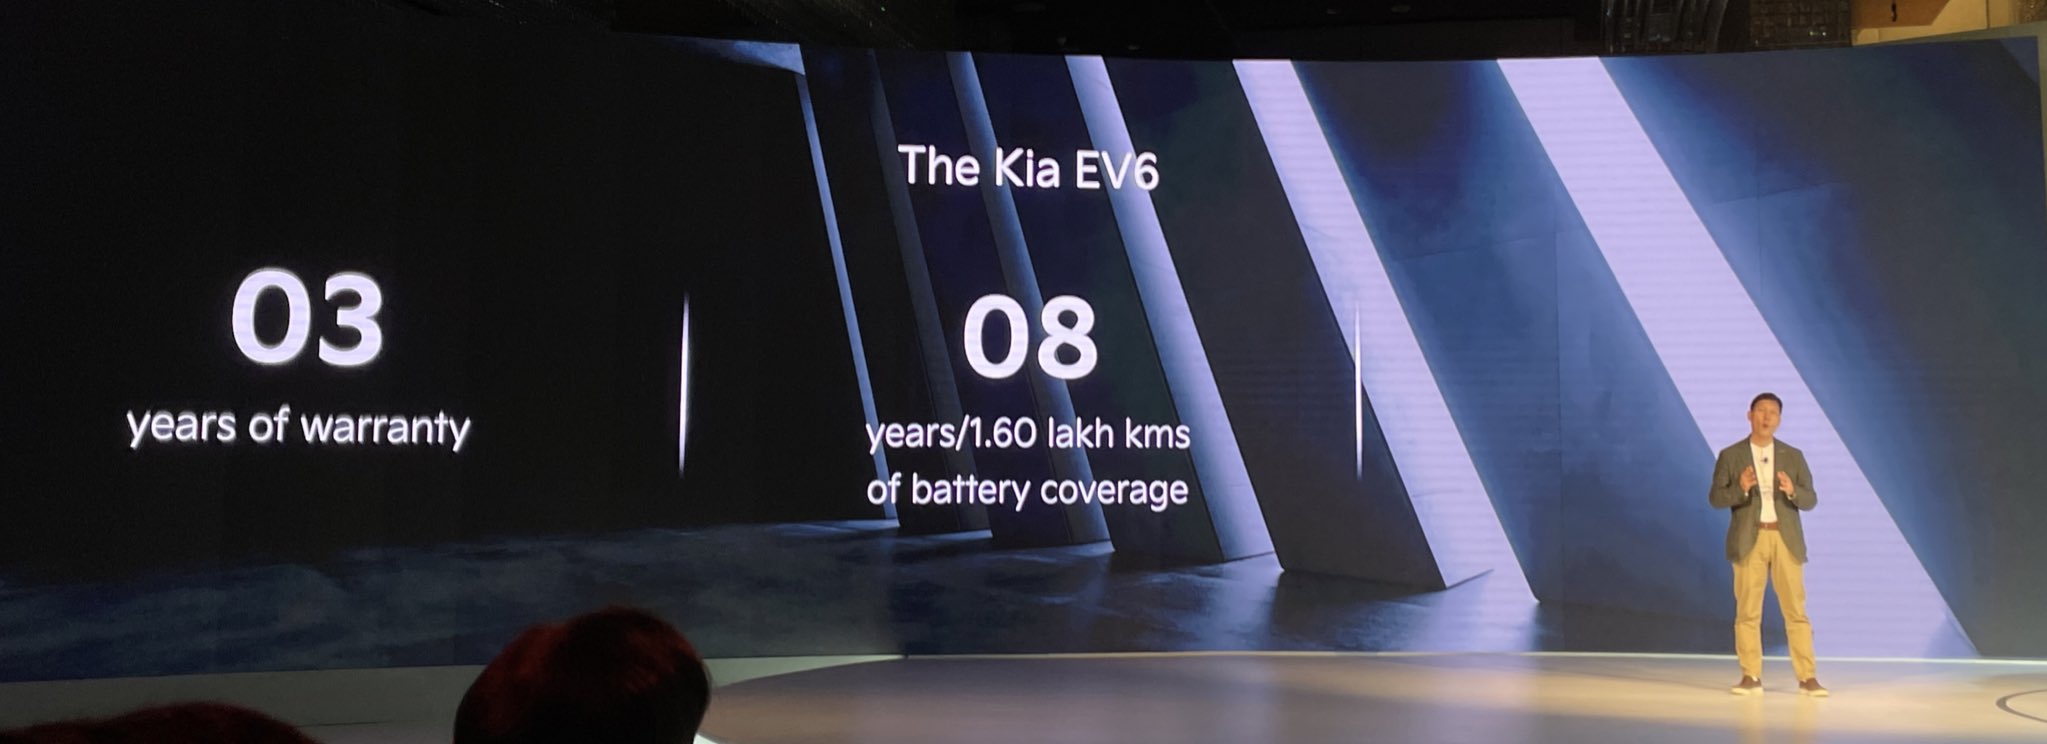 <p>Standard 8yr battery warranty, 3yr vehicle warranty, and 3yr around-the-clock roadside assistance with the Kia EV6</p>